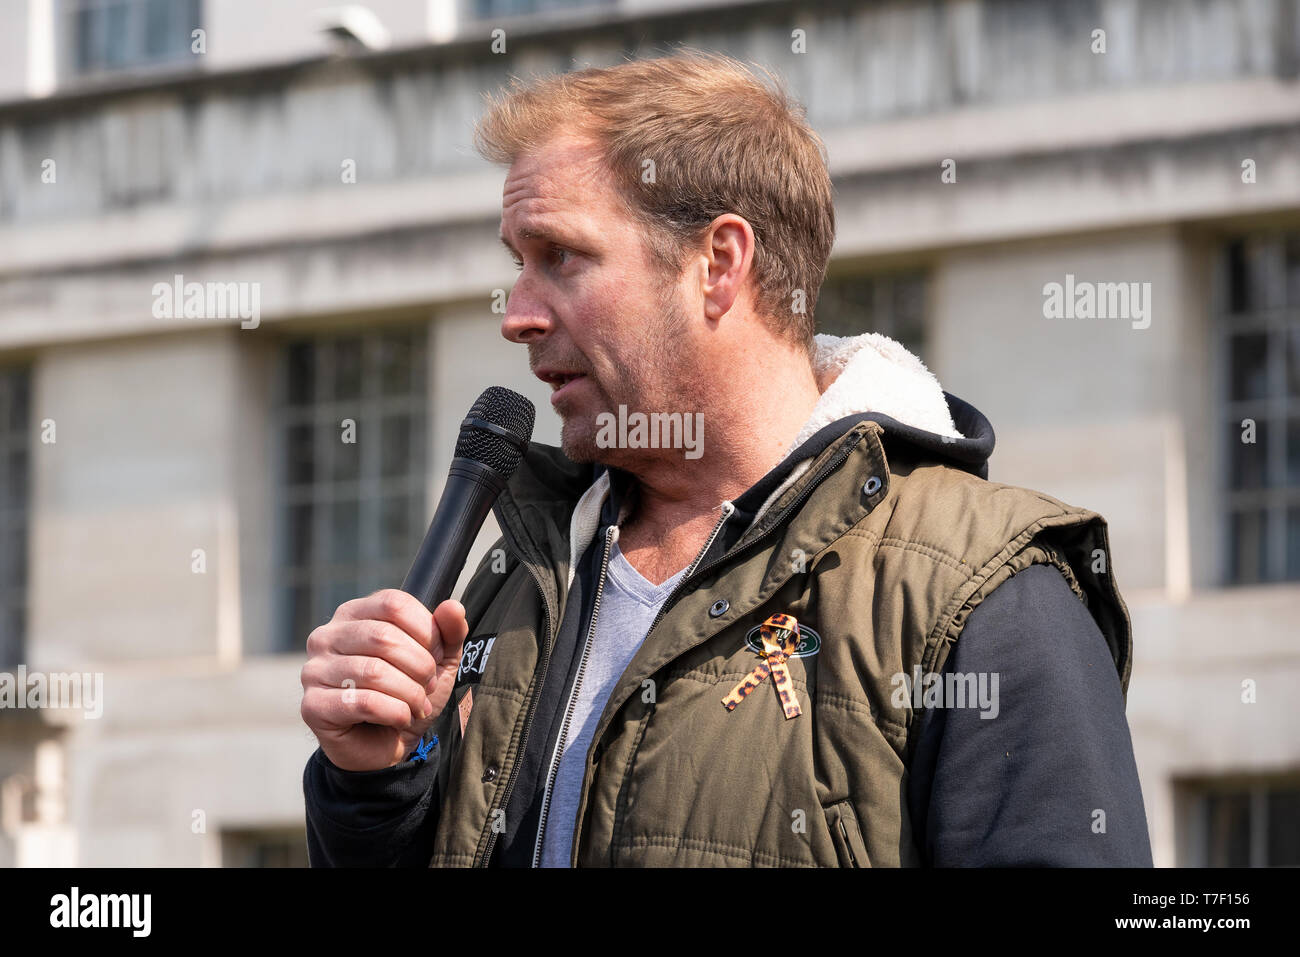 Dan Richardson, Compere, Actor, Ambassador for Born Free, at the London March Against Trophy Hunting and Extinction opposite Downing Street, London. Stock Photo